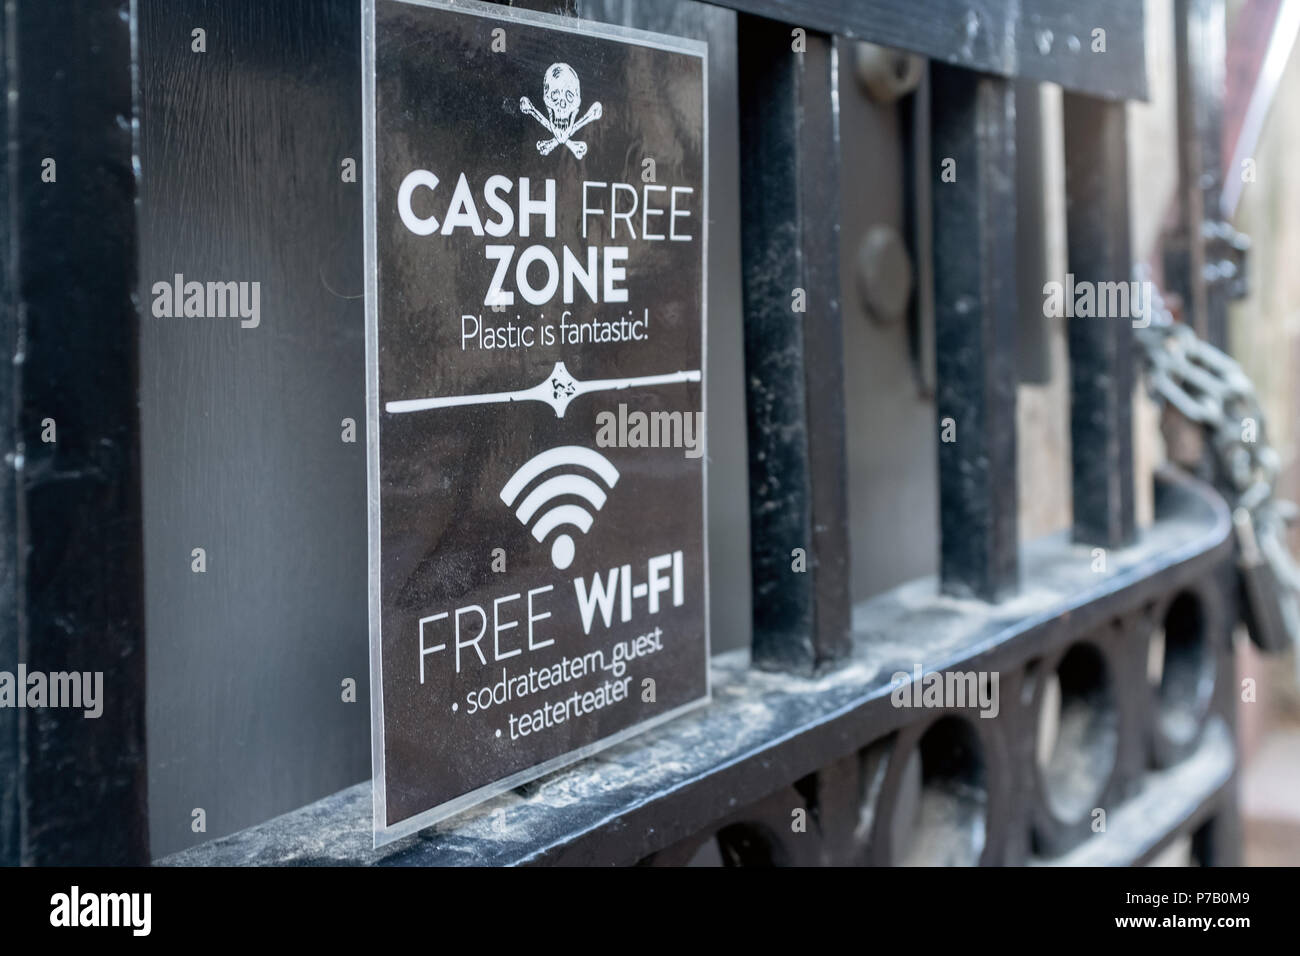 Cash Free Zone and Free Wi Fi sign, Sodermalm, Stockholm, Sweden Stock Photo